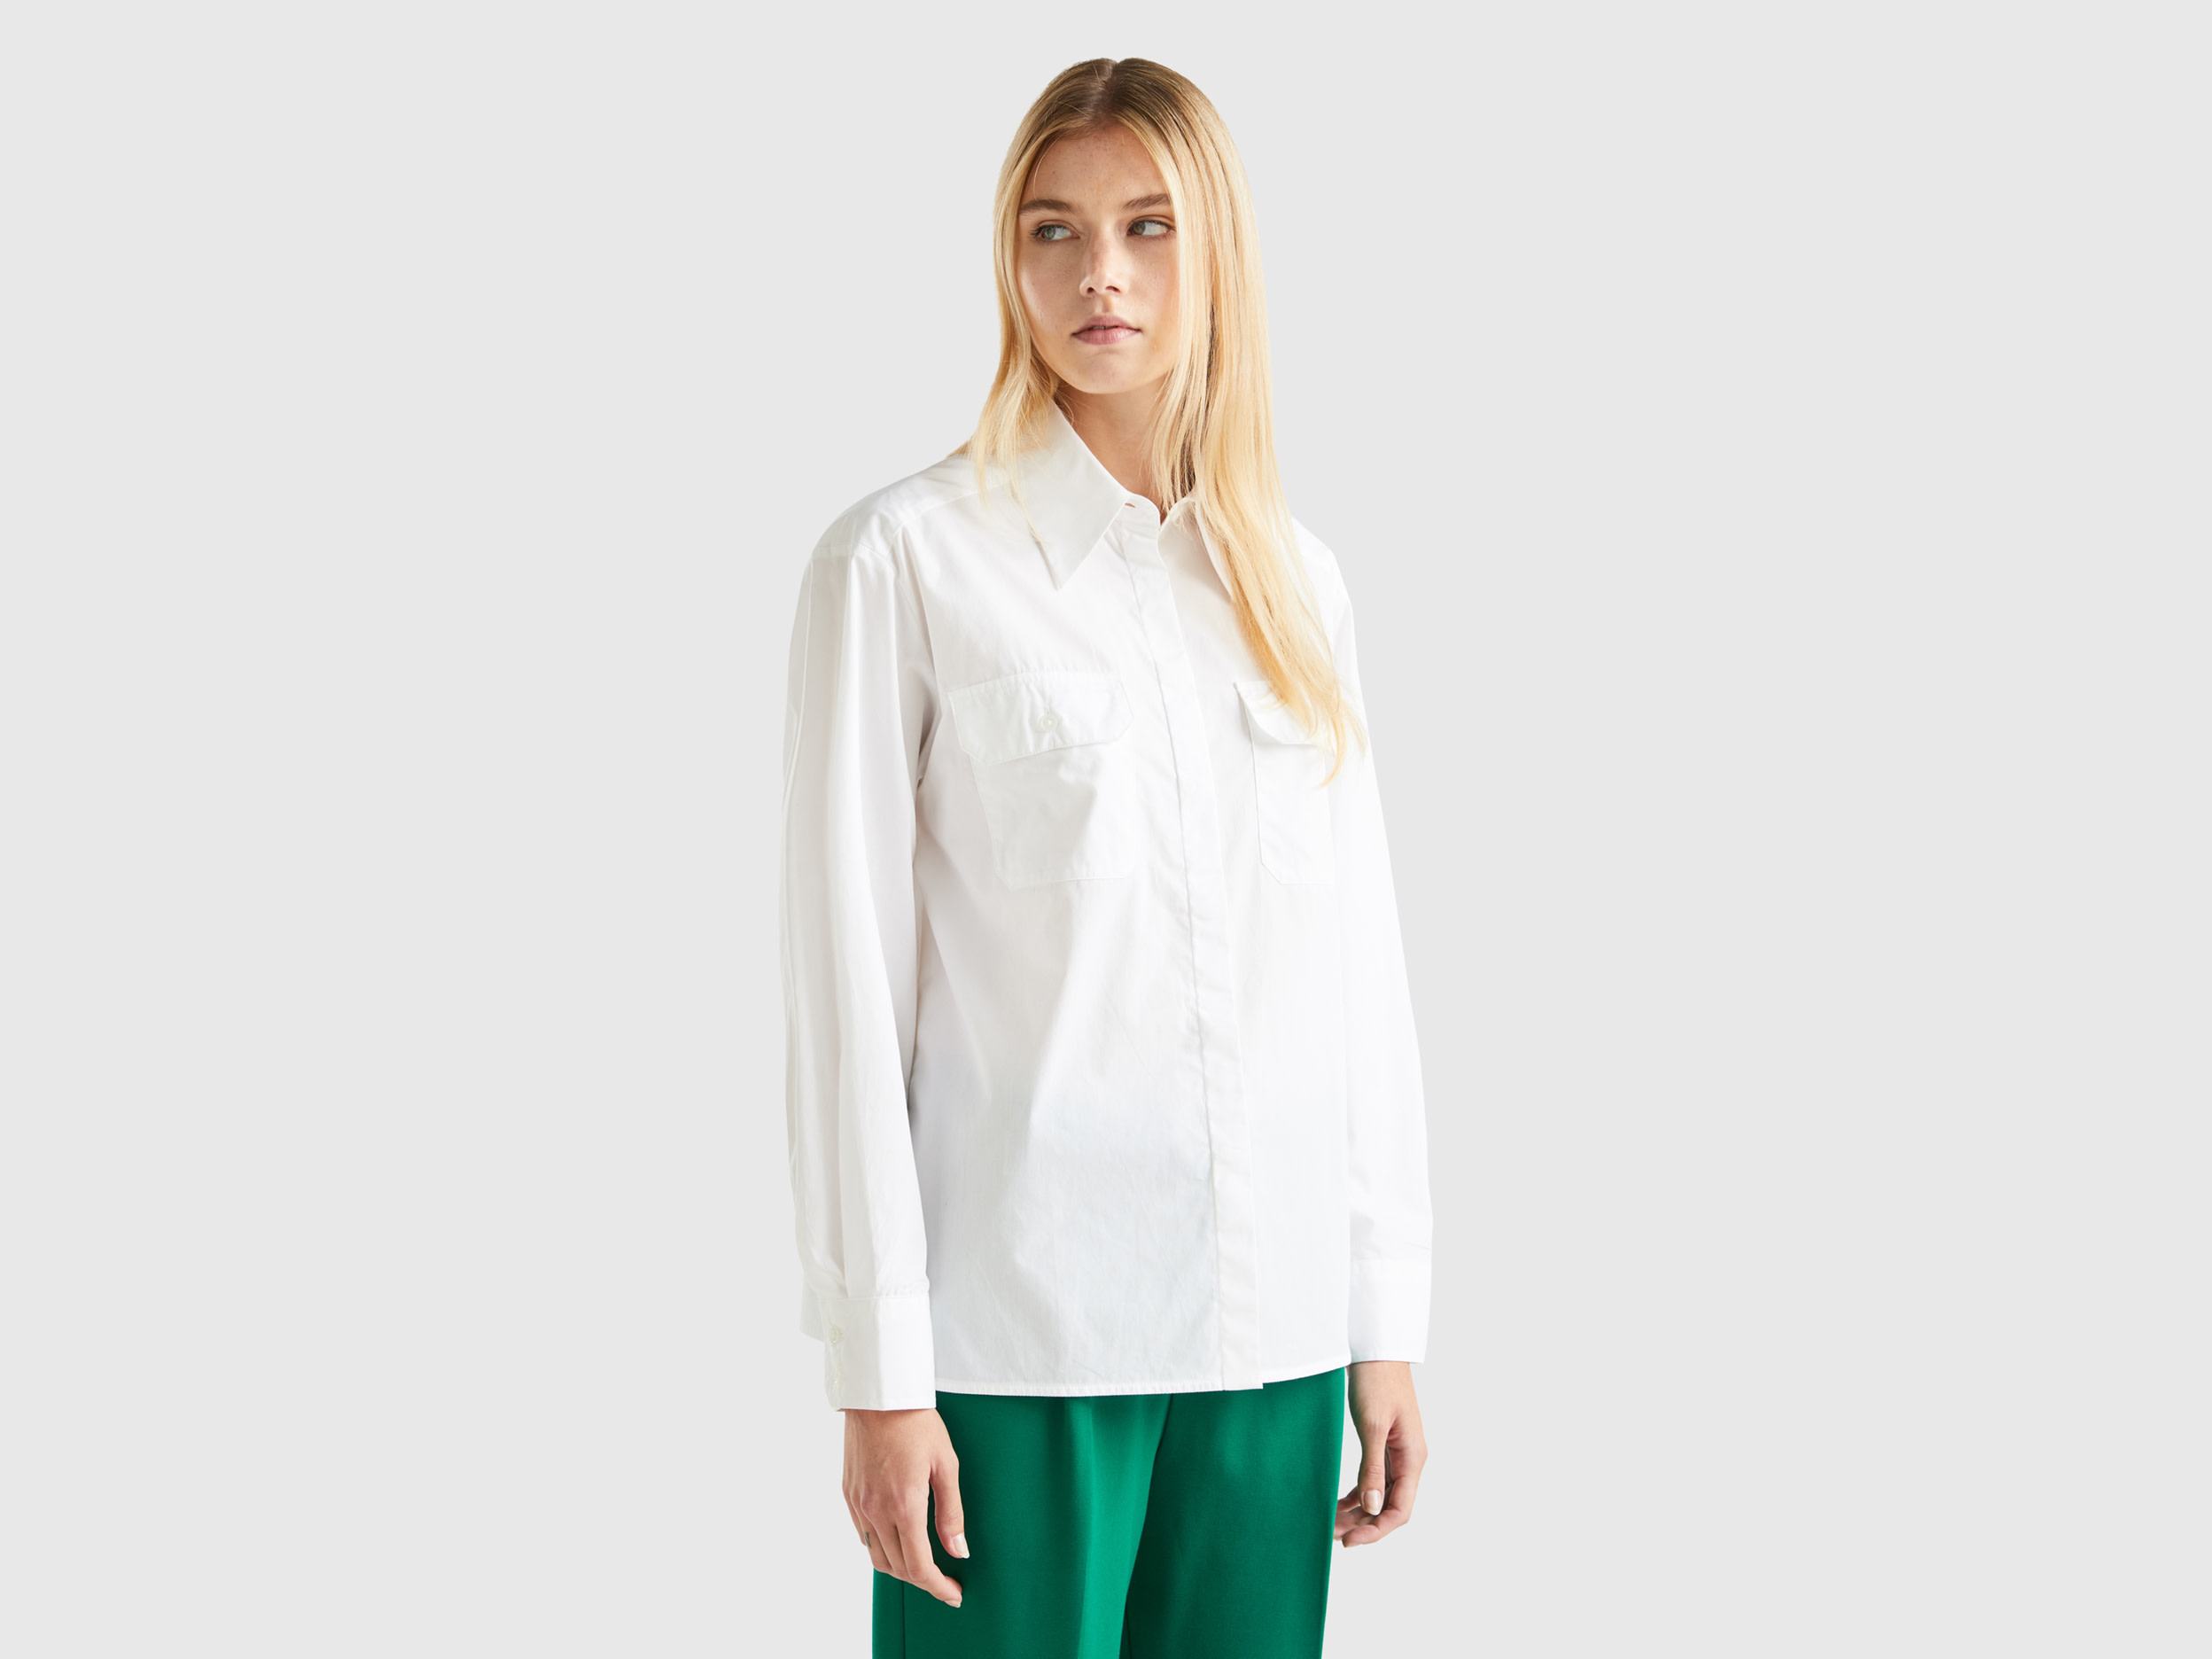 Benetton, Shirt With Pockets And Slits, size M, White, Women